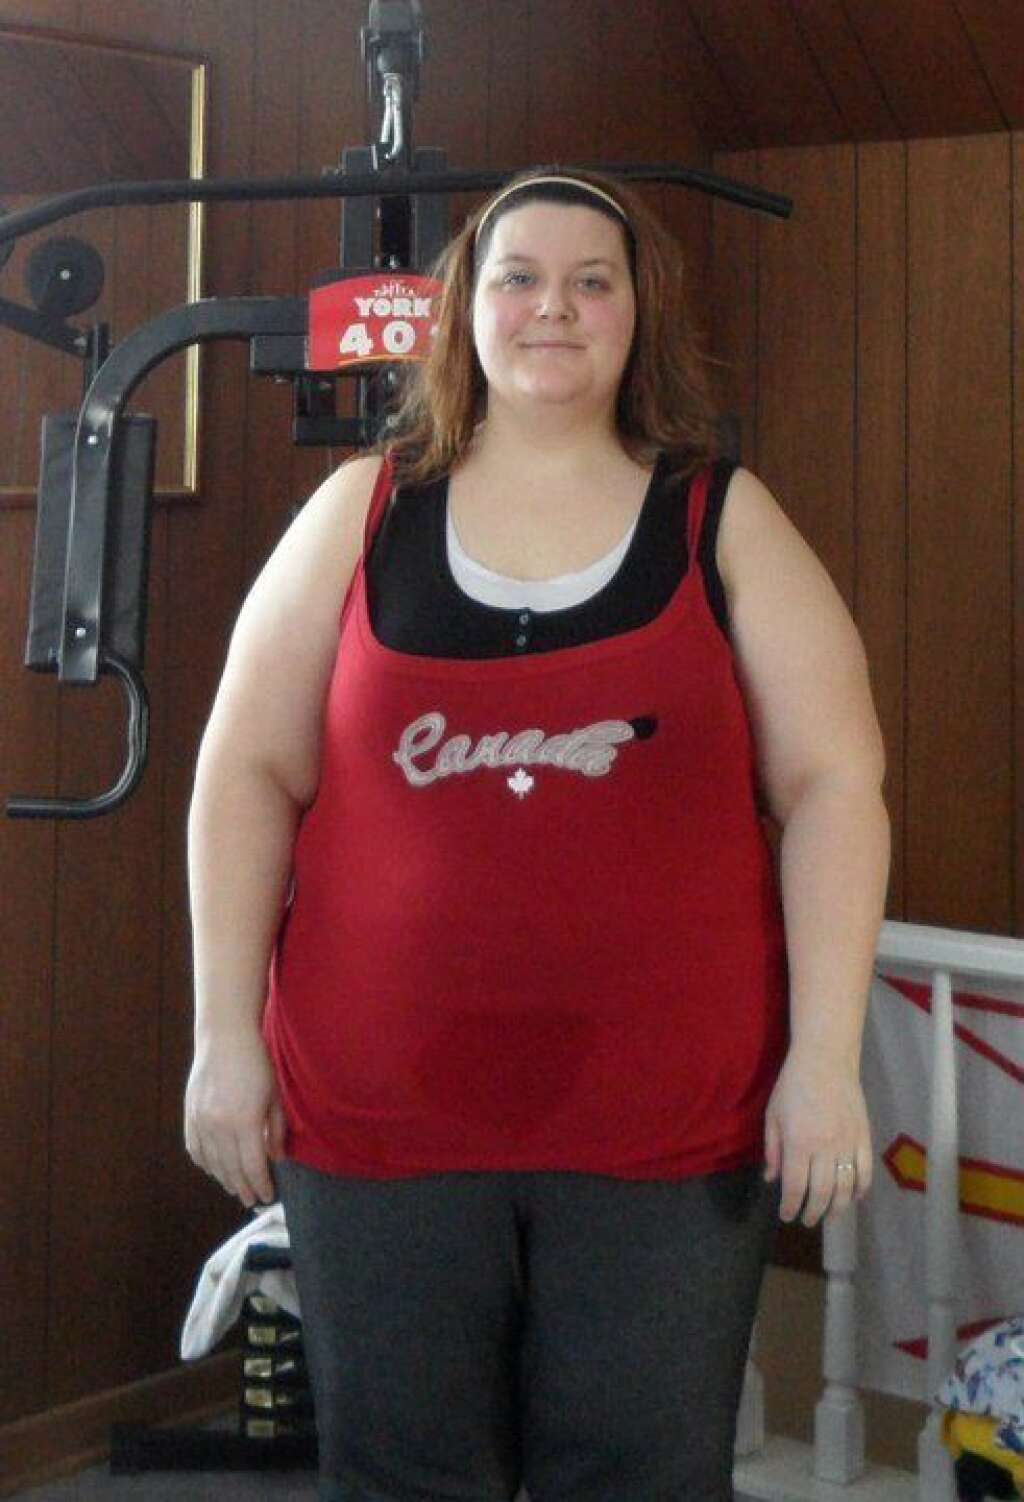 Sara BEFORE - <a href="http://www.huffingtonpost.com/2013/01/25/i-lost-weight-sara-bown_n_2488390.html">Read Sara's story here.</a>